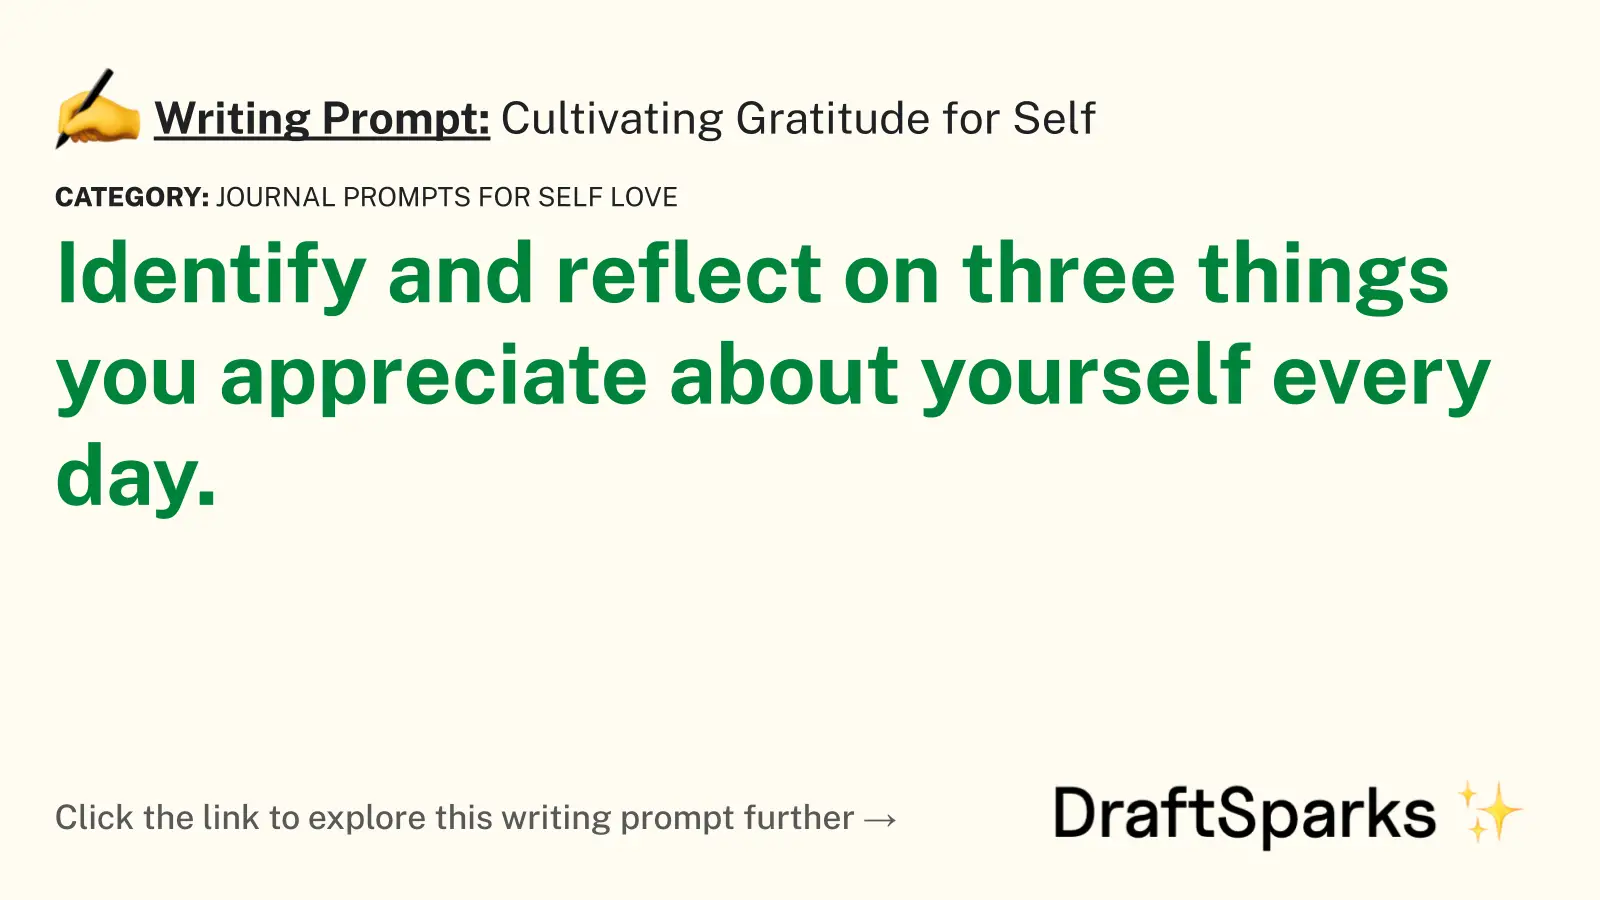 Cultivating Gratitude for Self